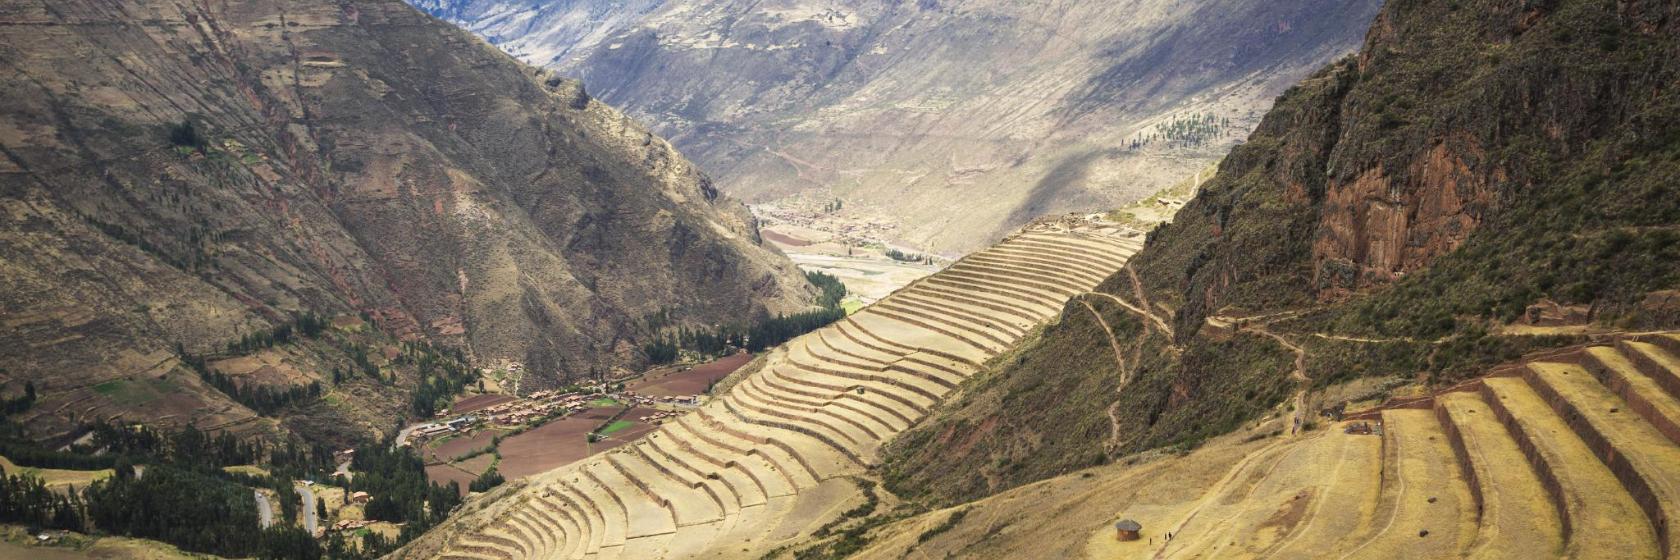 10 Top-Rated hotels in Sacred Valley, Peru